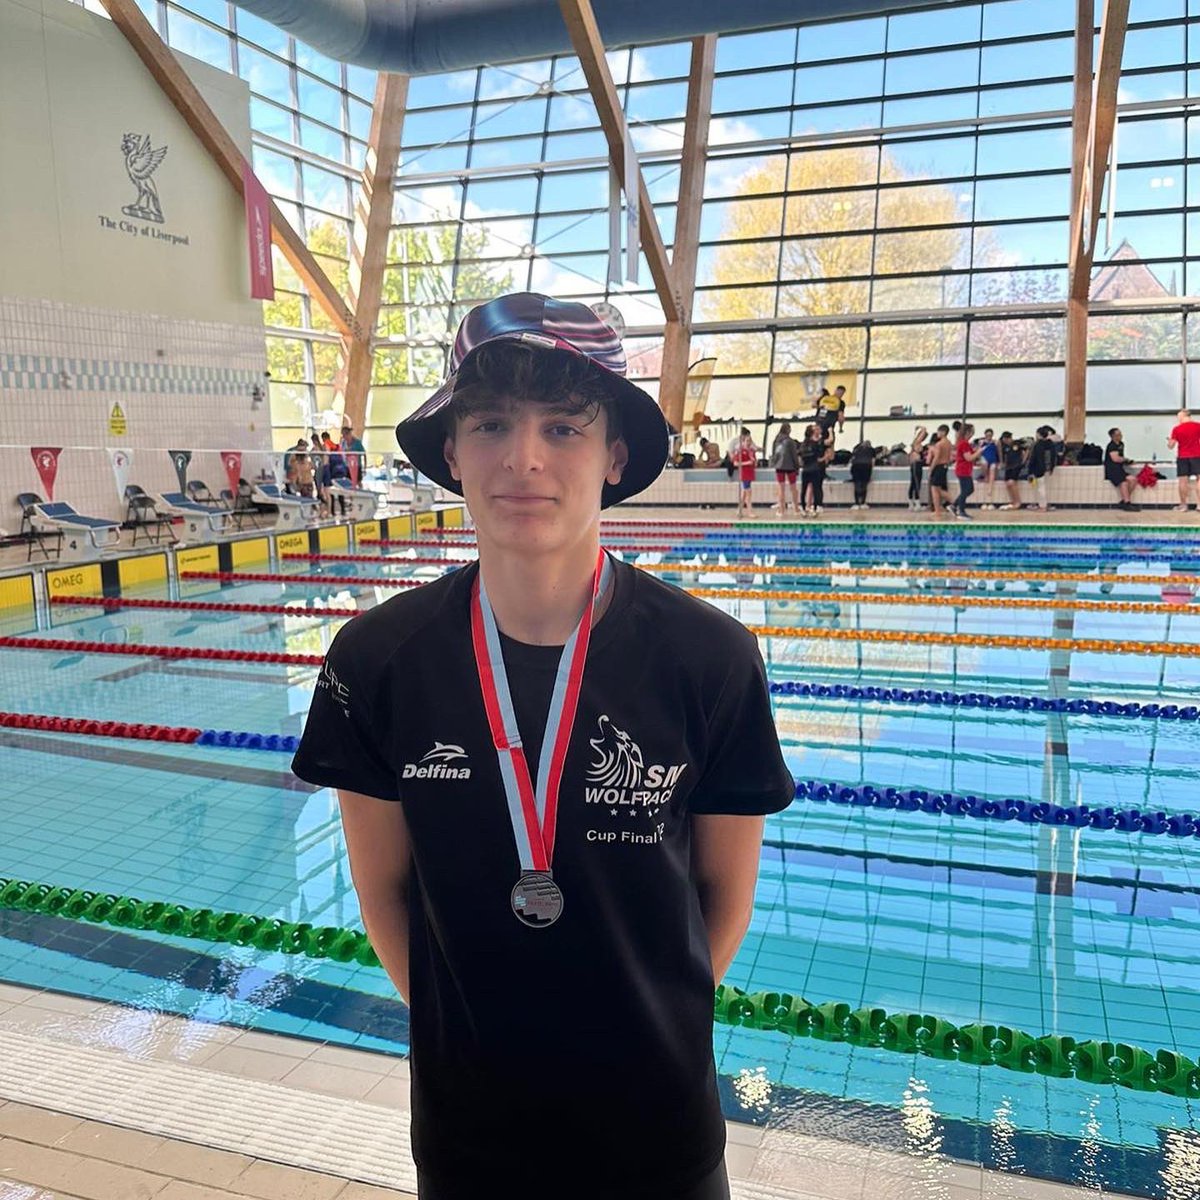 Another top day of racing for the Age Groupers at @SwimEnglandNW Regional AG Champs. The team added 4 more medals and 13 finals/top 8 making the total after 1 weekend 12 medals and 33 finals and LOADS of big PBS. A huge thank you to Liam and TMs Cathy and Vicki. @lifeleisureuk